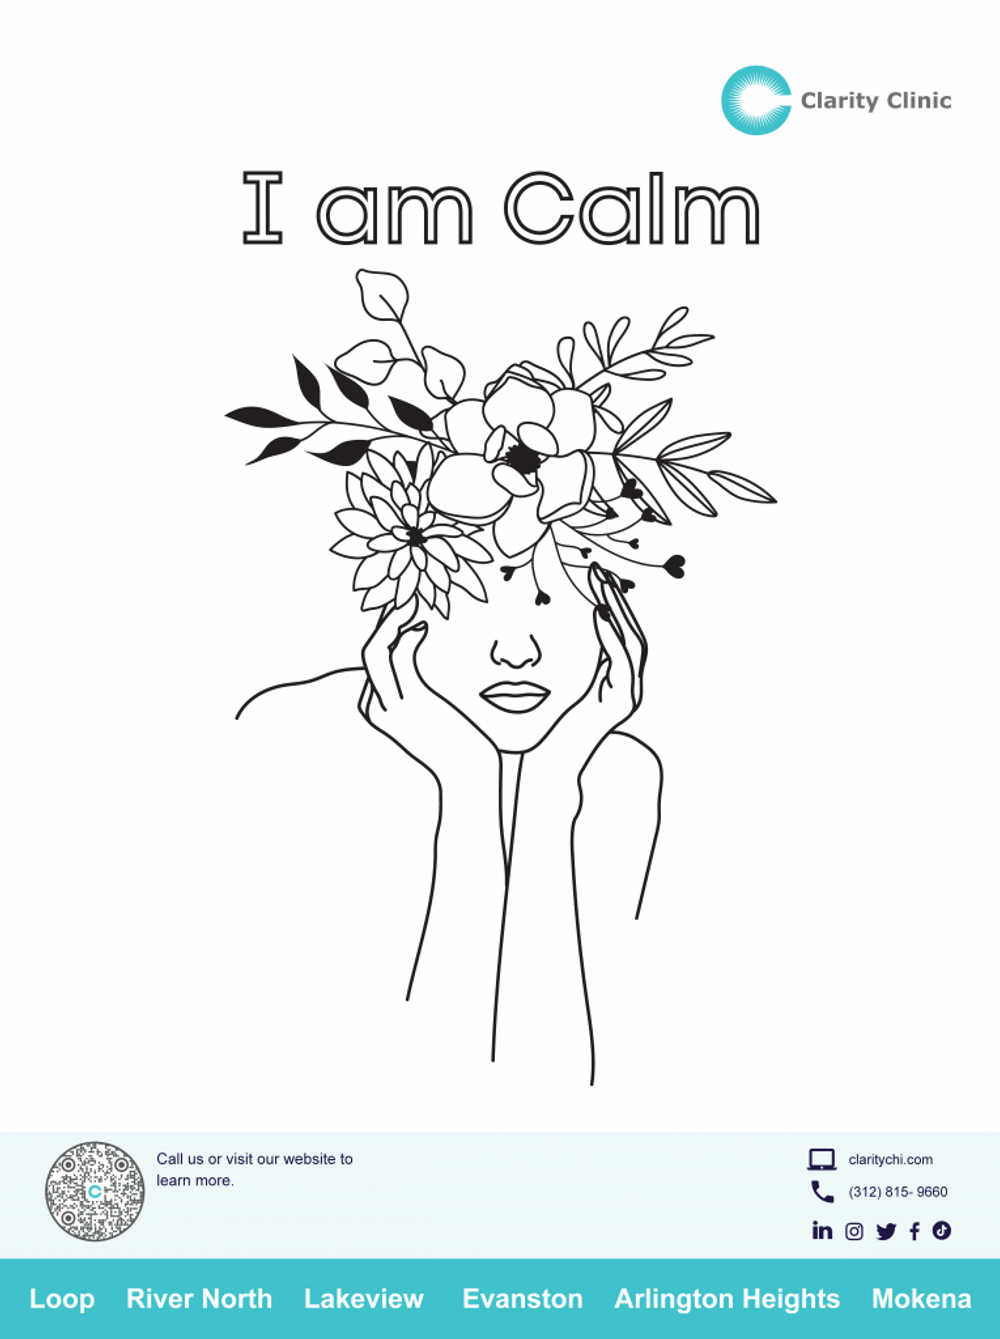 Clarity Clinic Coloring Sheet - I am Calm